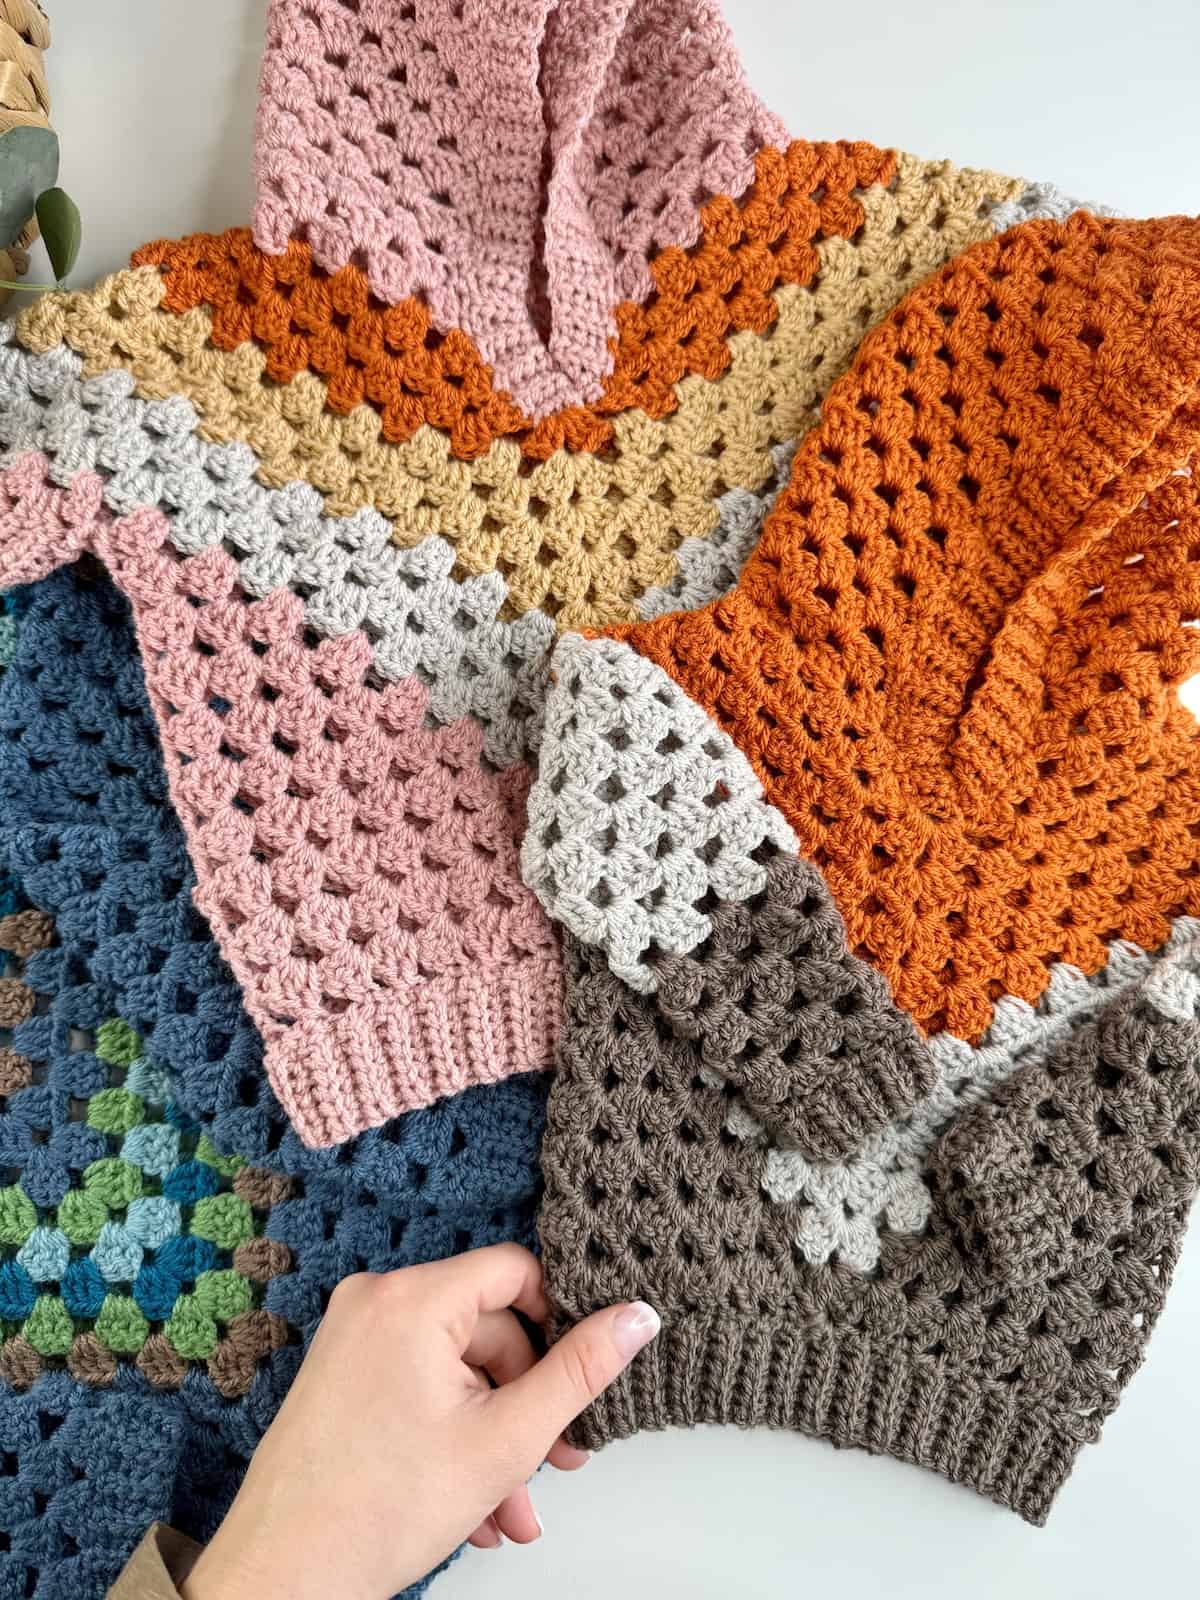 A hand holding a crocheted hoodie.